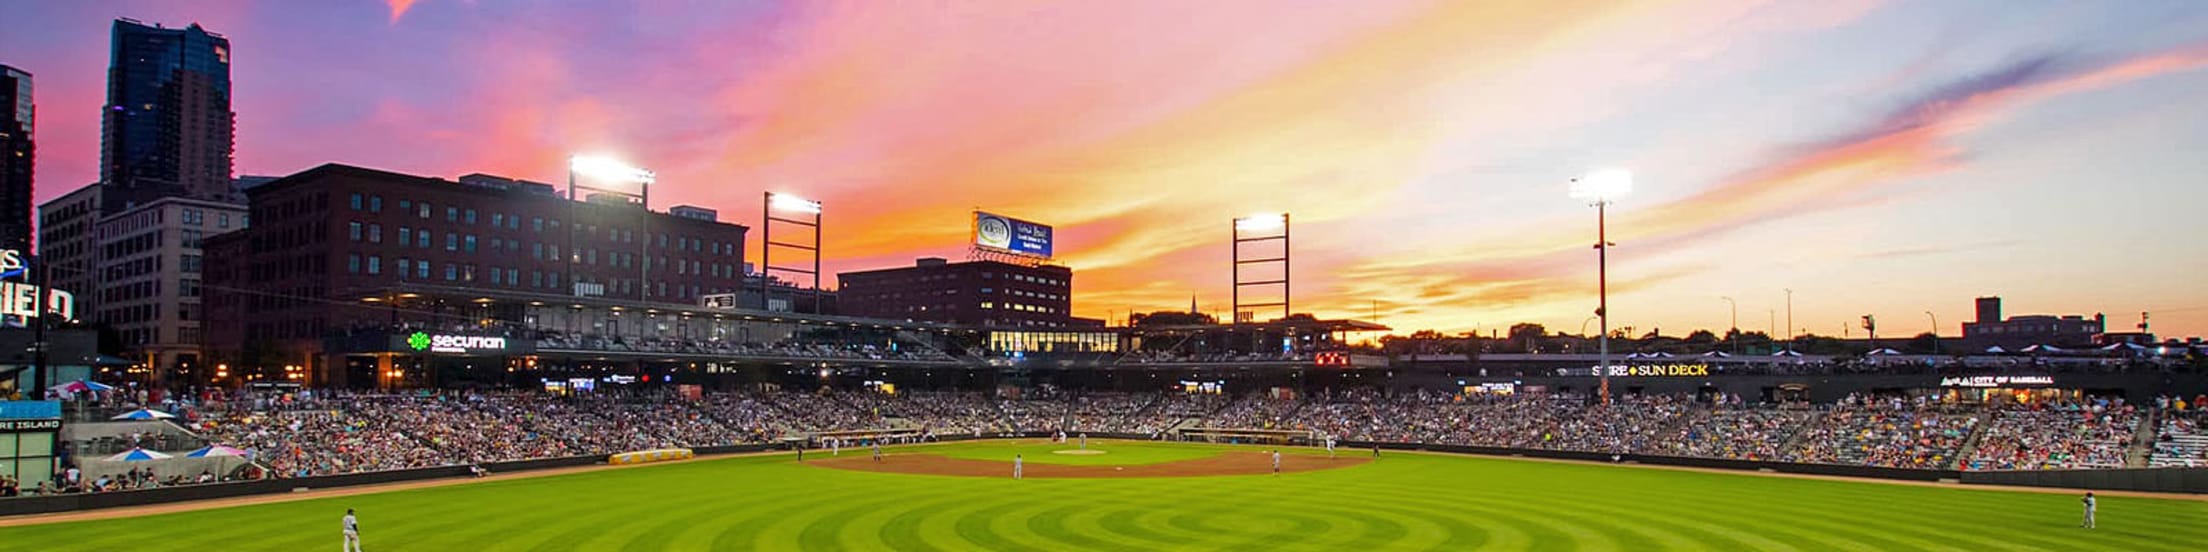 The St Paul Saints are now in affiliated ball. What is next for